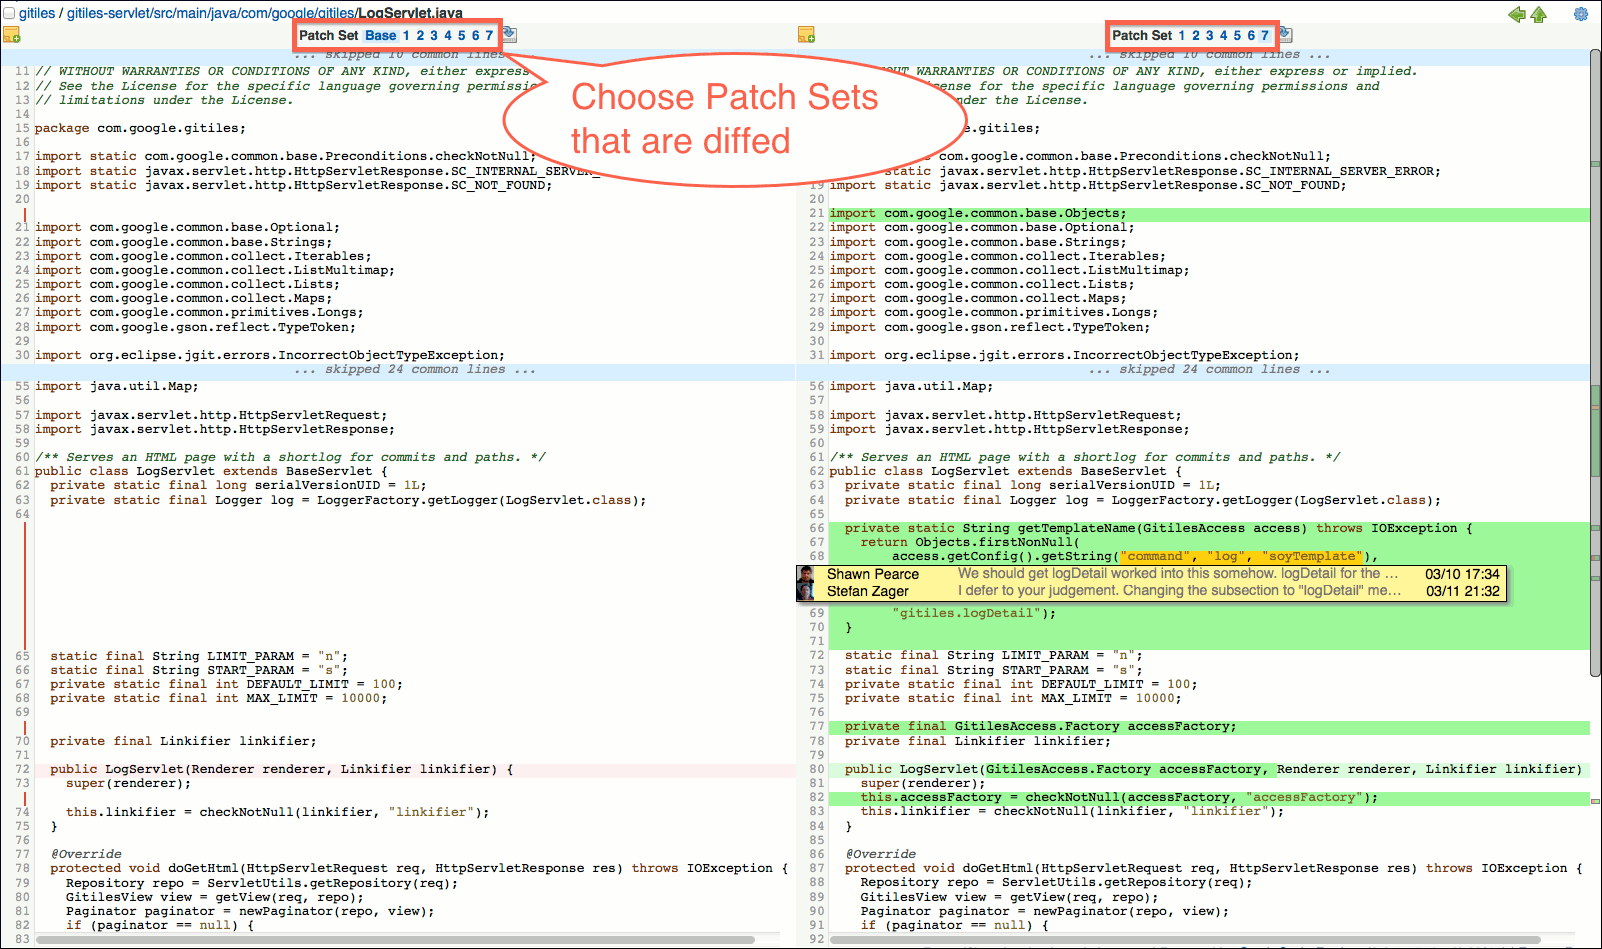 gwt user review ui side by side diff screen patch sets